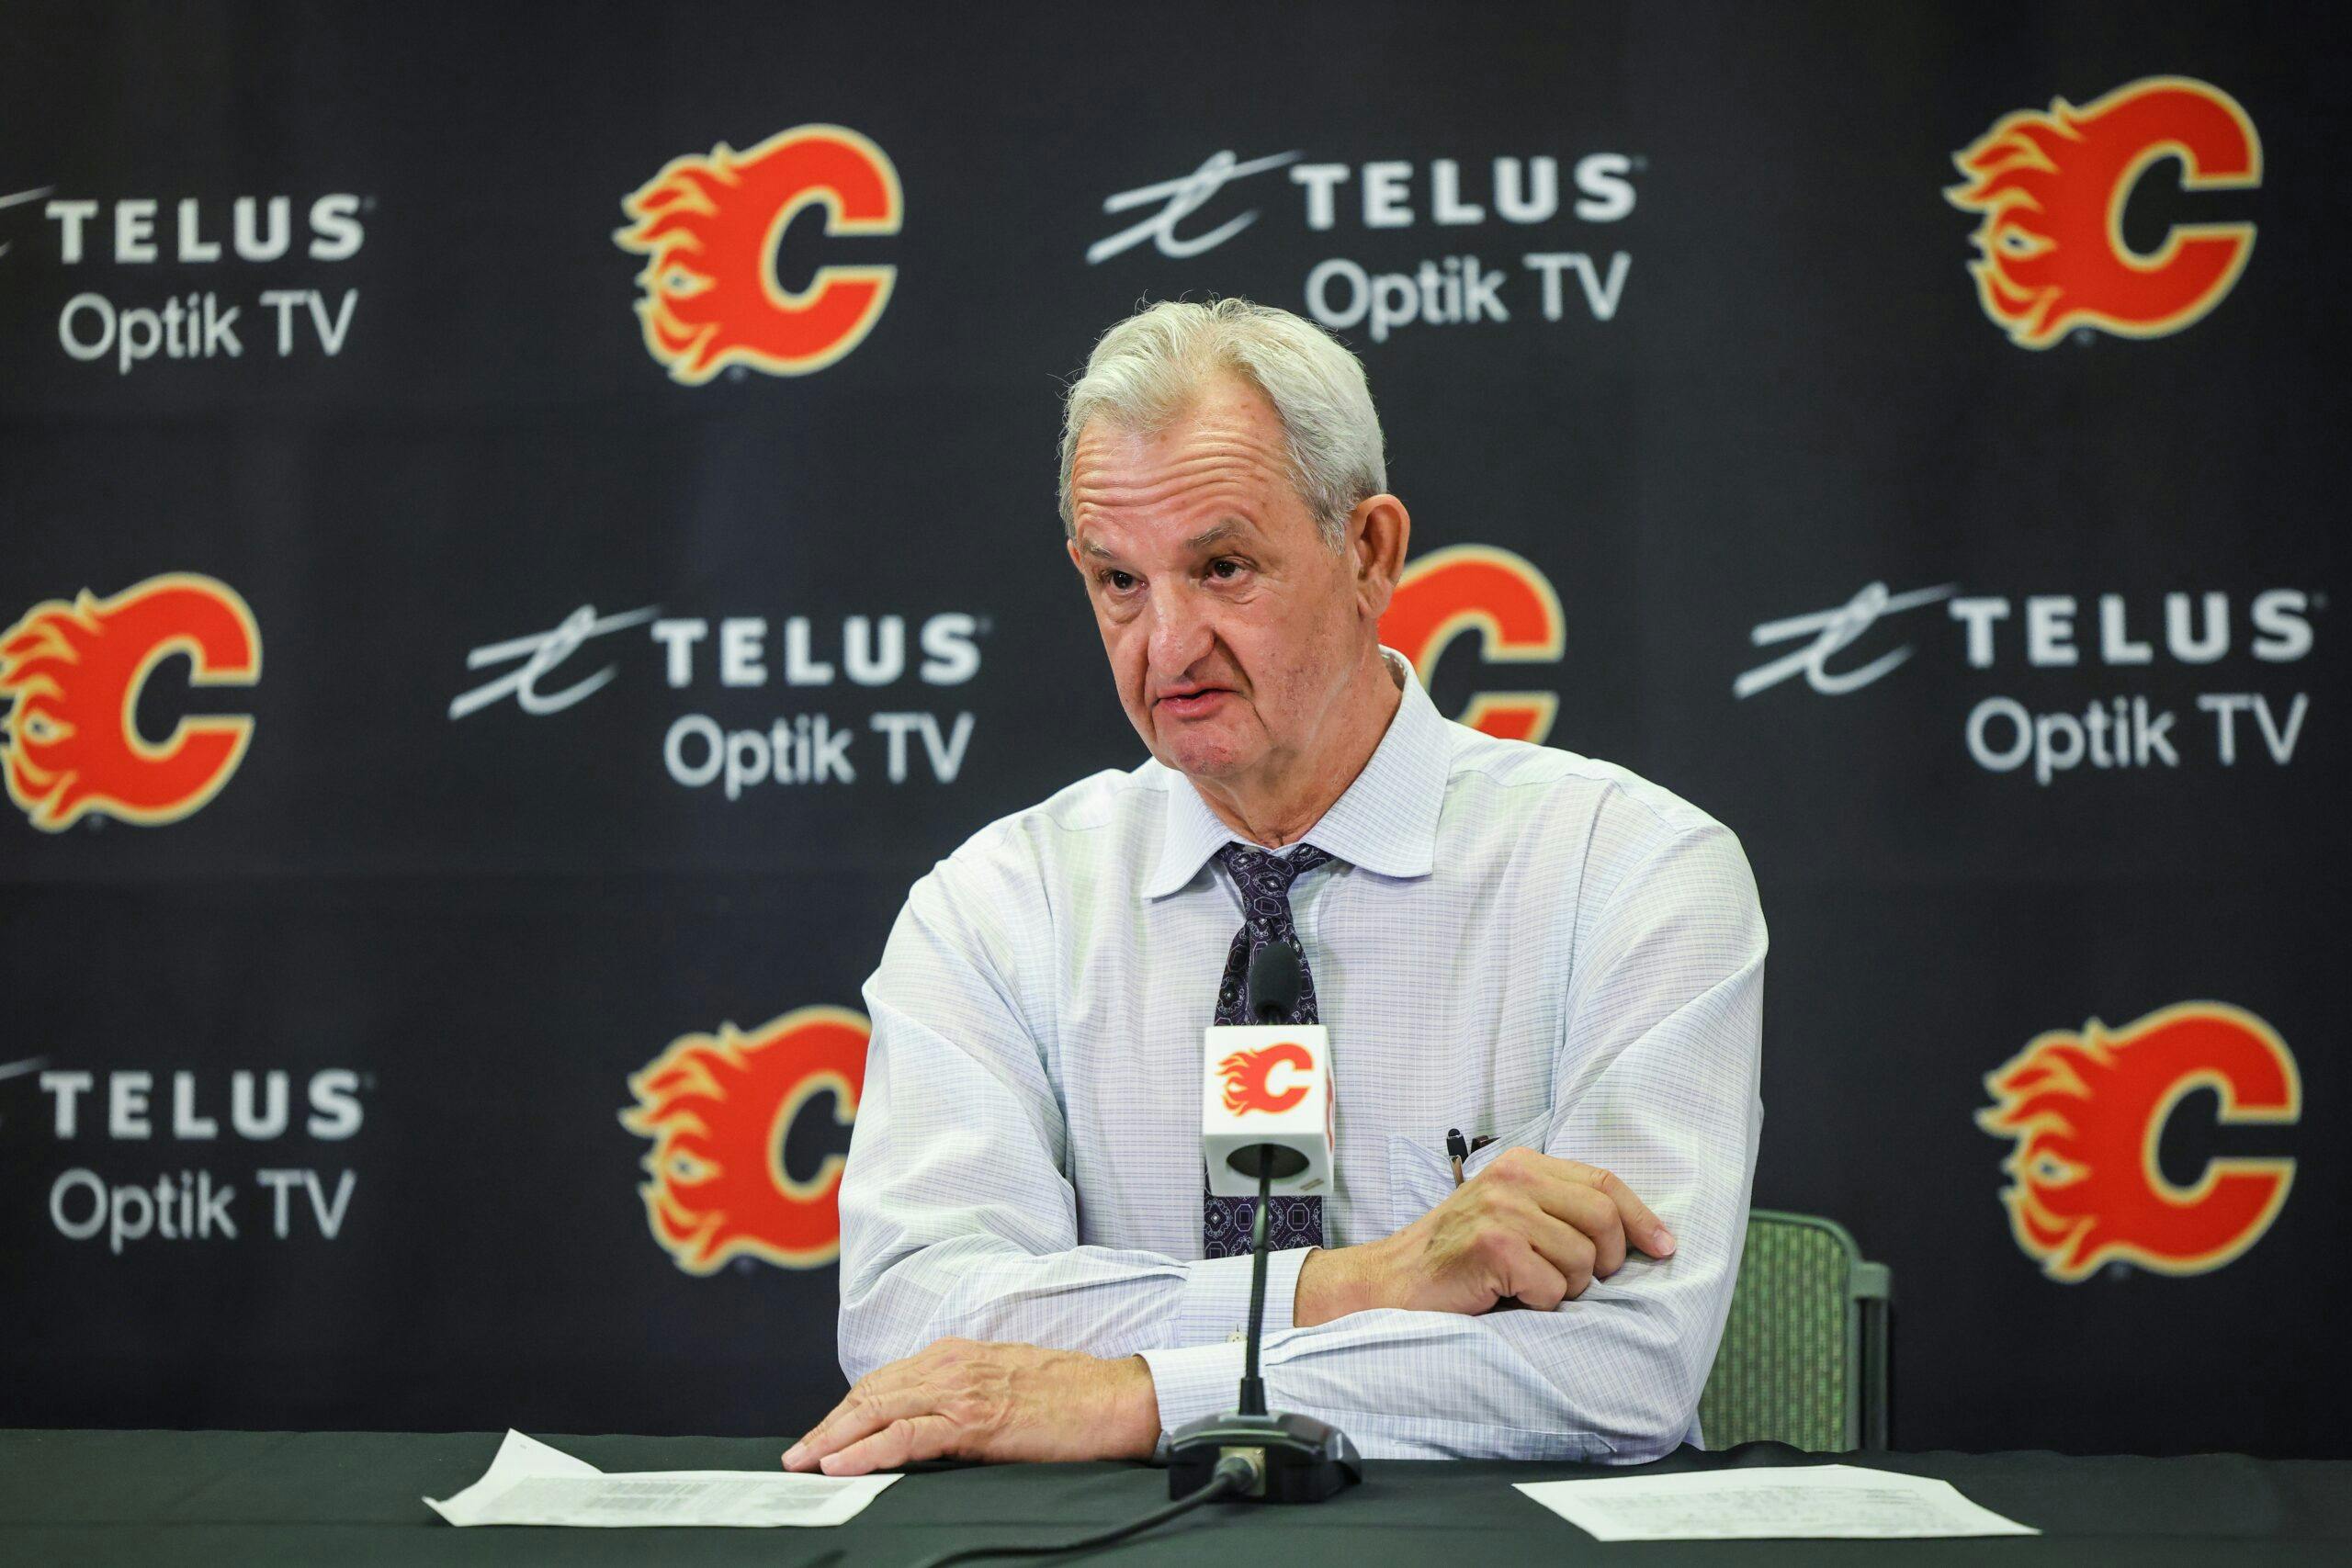 Did the Flames make the right call moving on from Darryl Sutter?